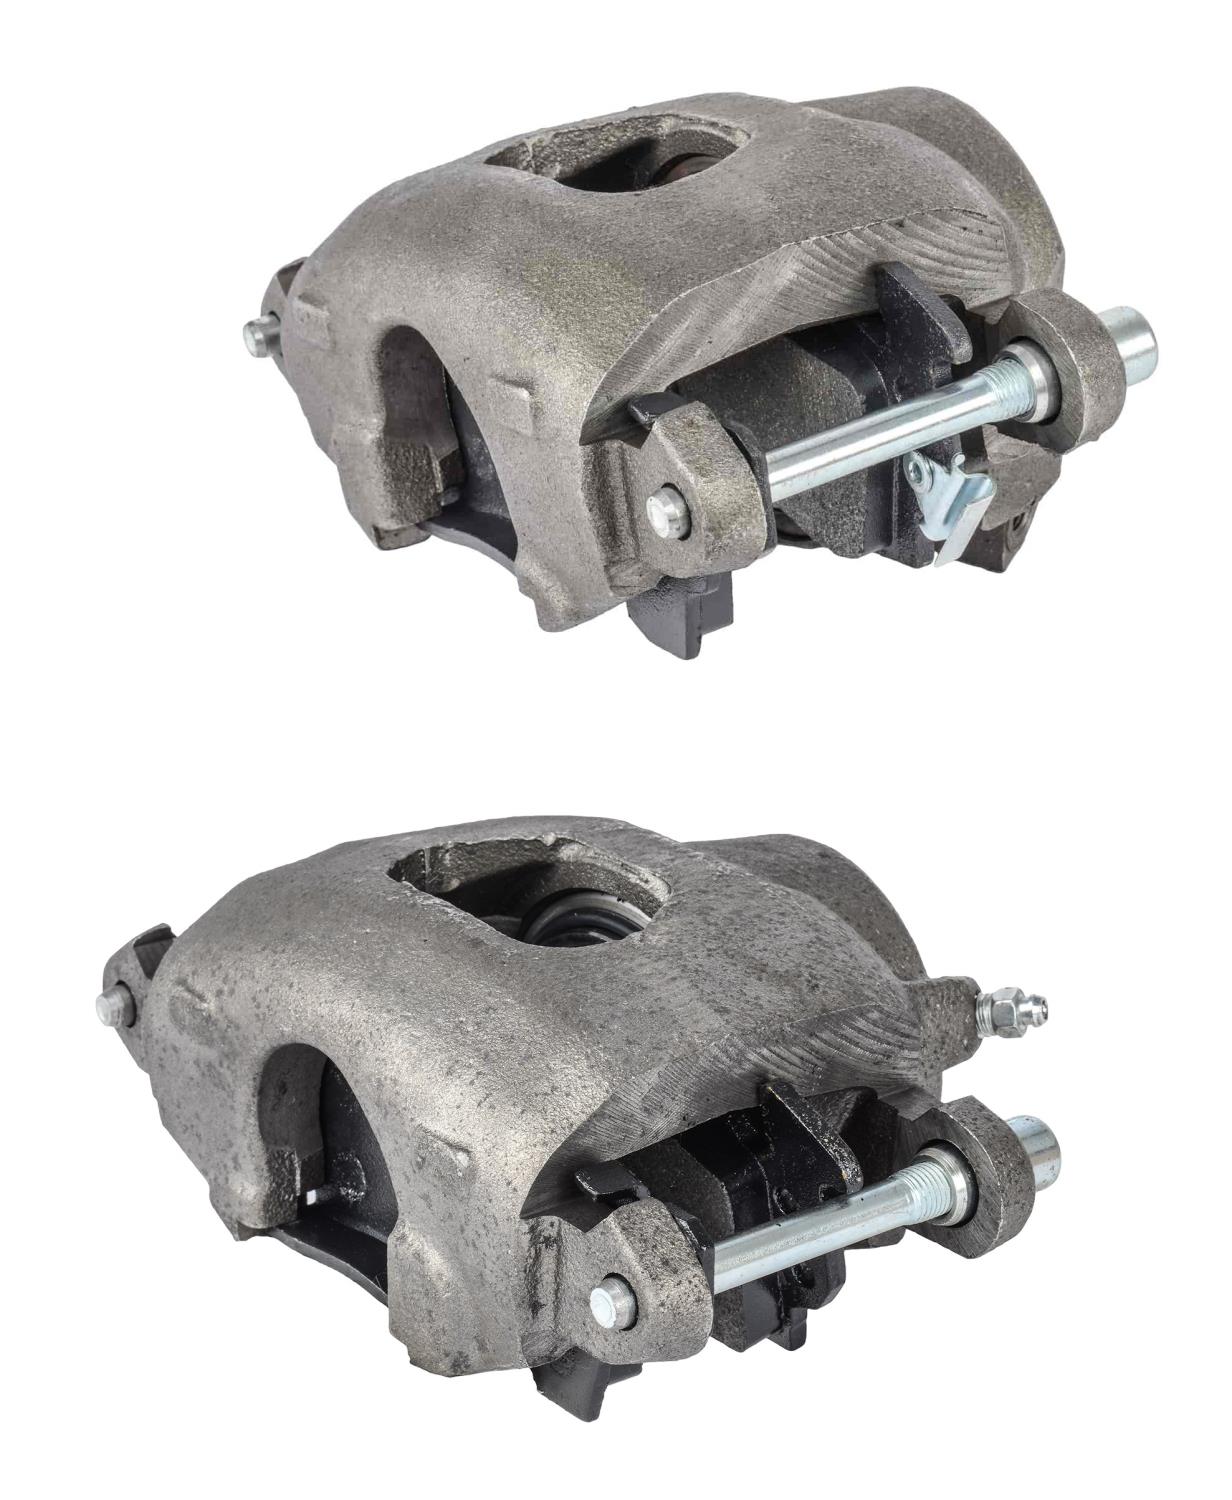 Large GM Front Disc Brake Caliper Set with D52 Pads, Left/Driver & Right/Passenger Side, Raw Finish [NEW]